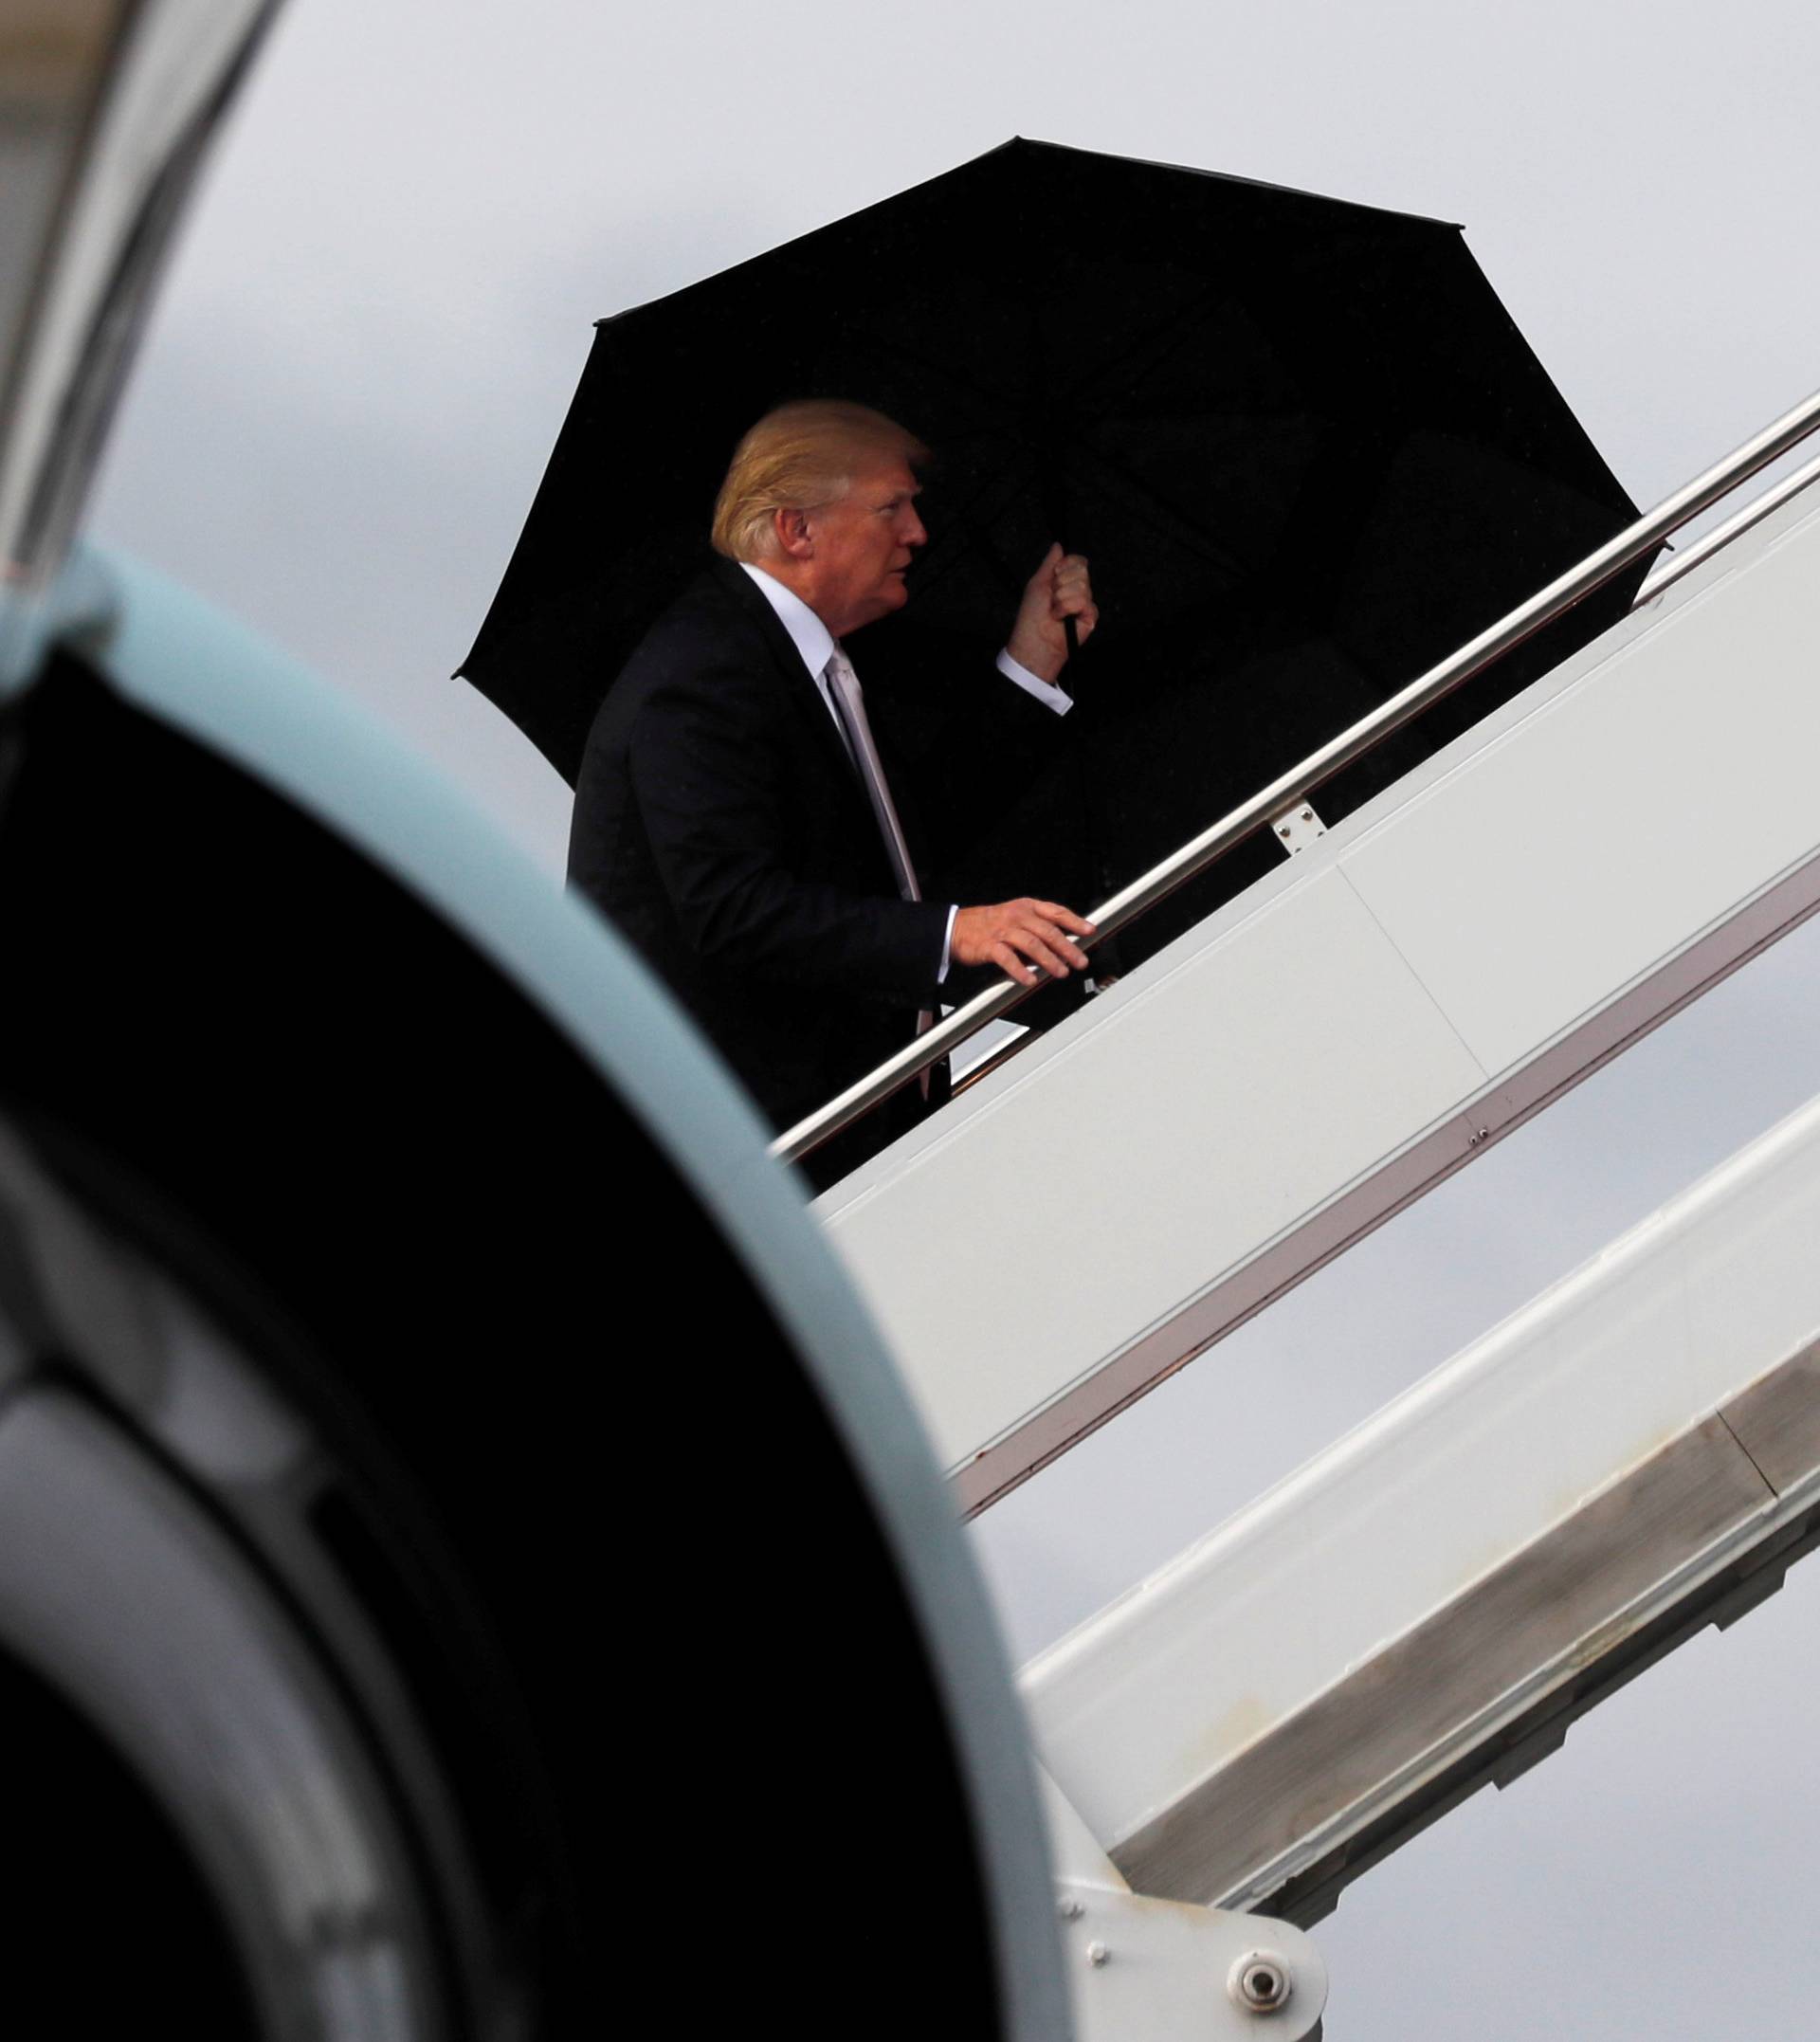 U.S. President Donald Trump boards Air Force One as he departs West Palm Beach